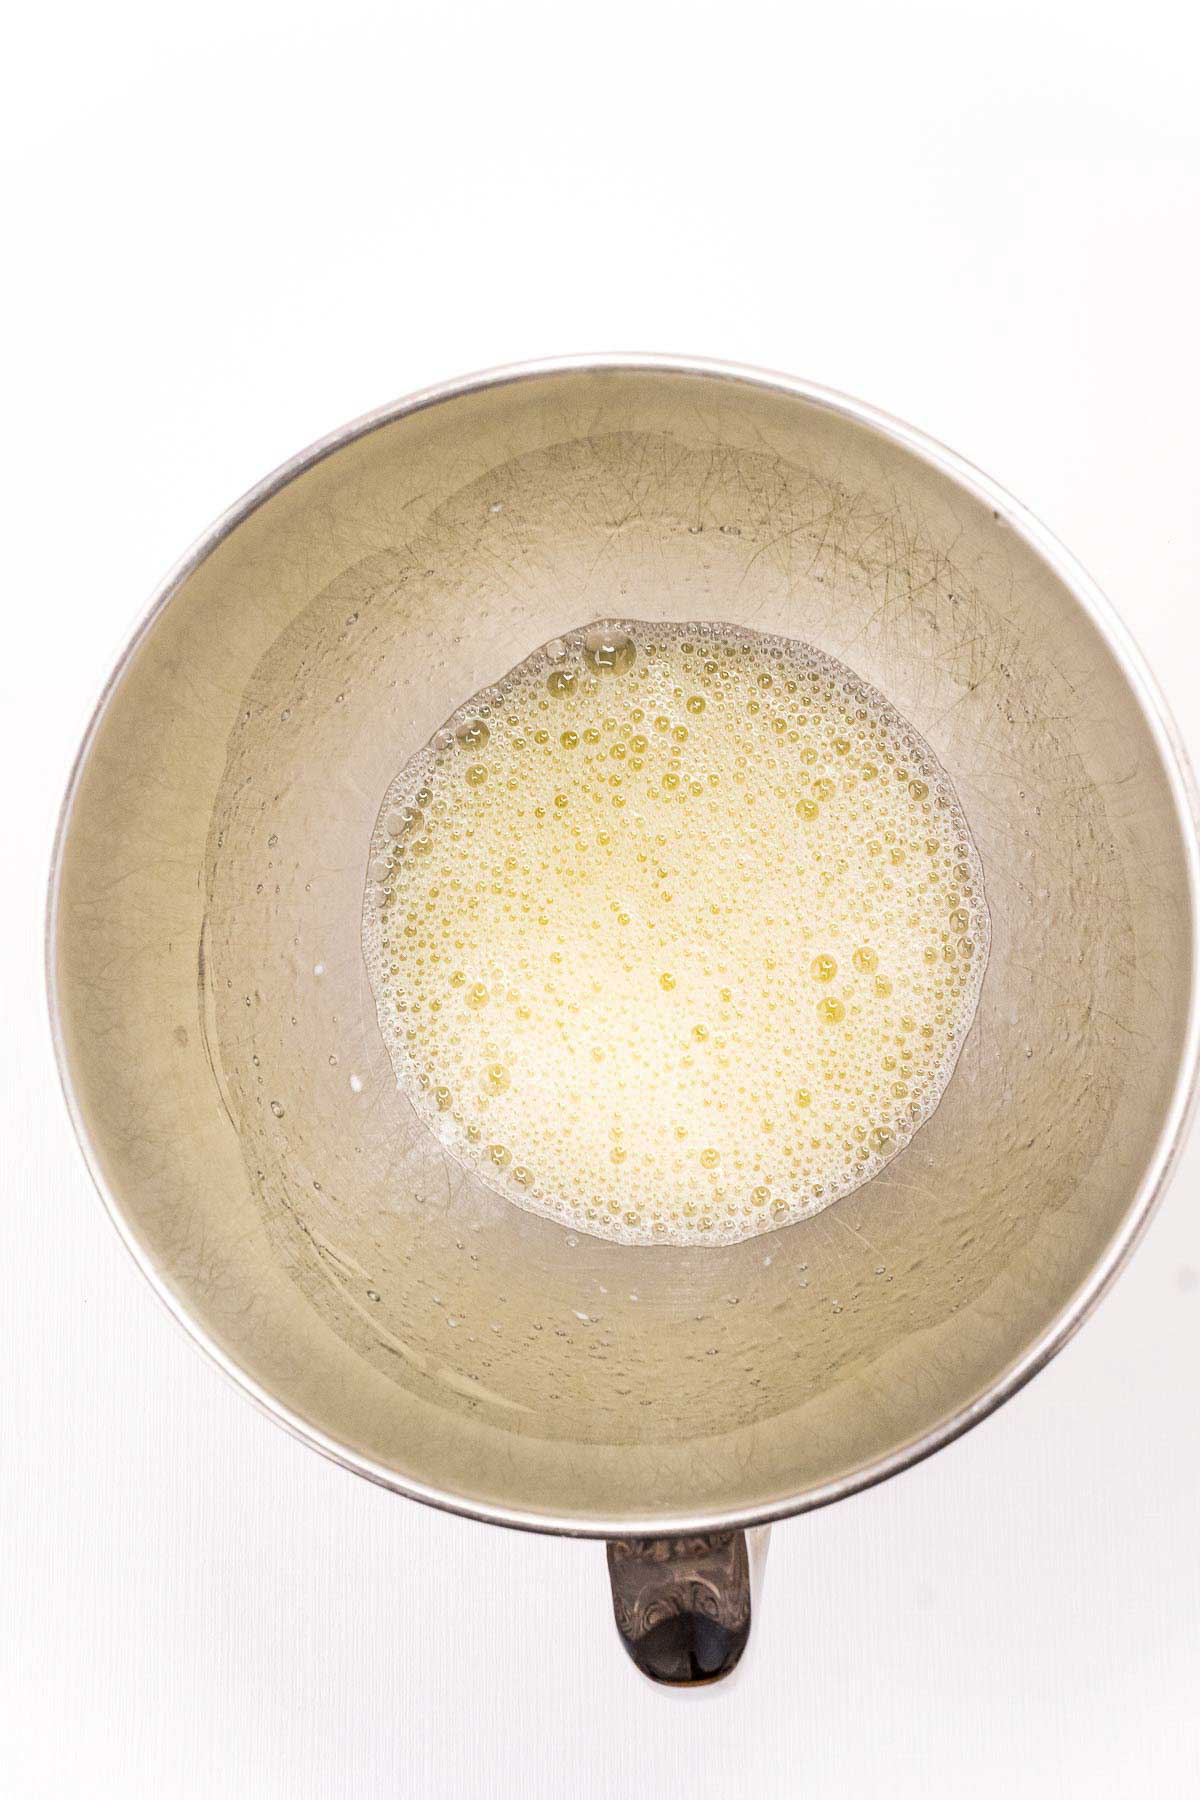 foamy egg whites in a mixing bowl